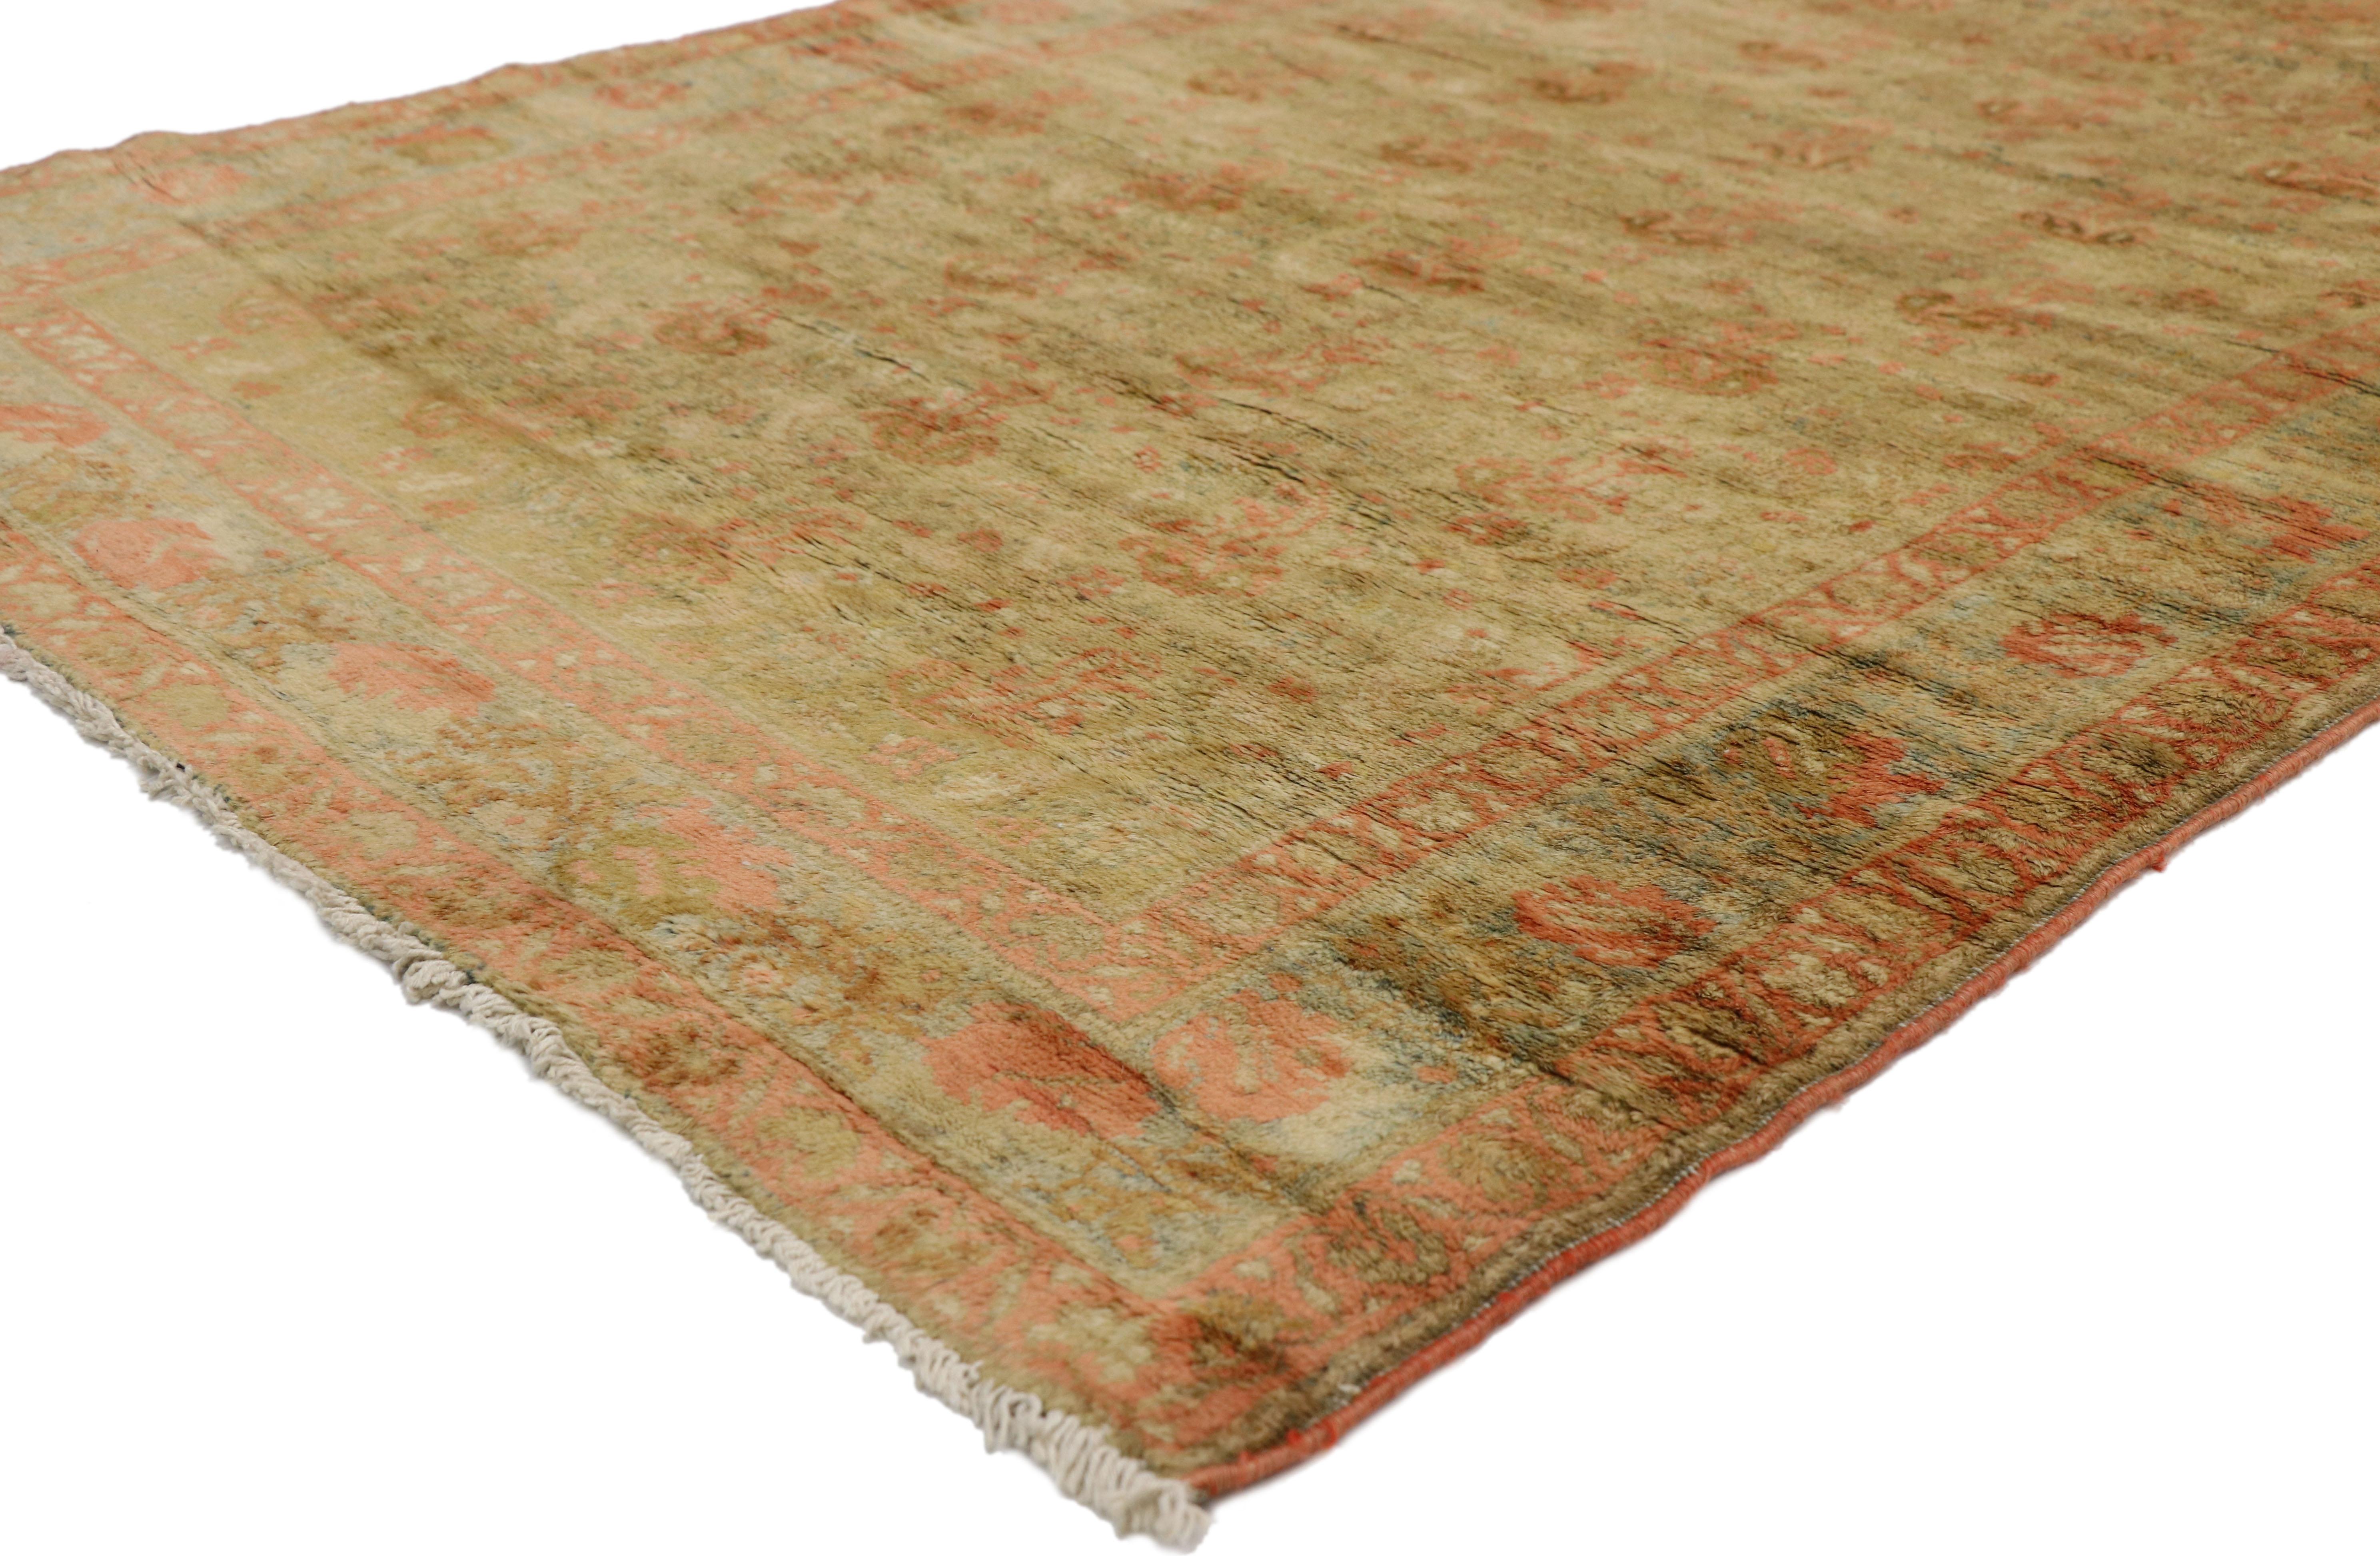 76571 Extra-Long Antique Persian Mahal Rug, 03'09 x 28'04. Persian Mahal carpet runners are a type of rug crafted in the Mahallat region of central Northwestern Iran, inheriting the distinguished characteristics of Persian Mahal rugs. These runners